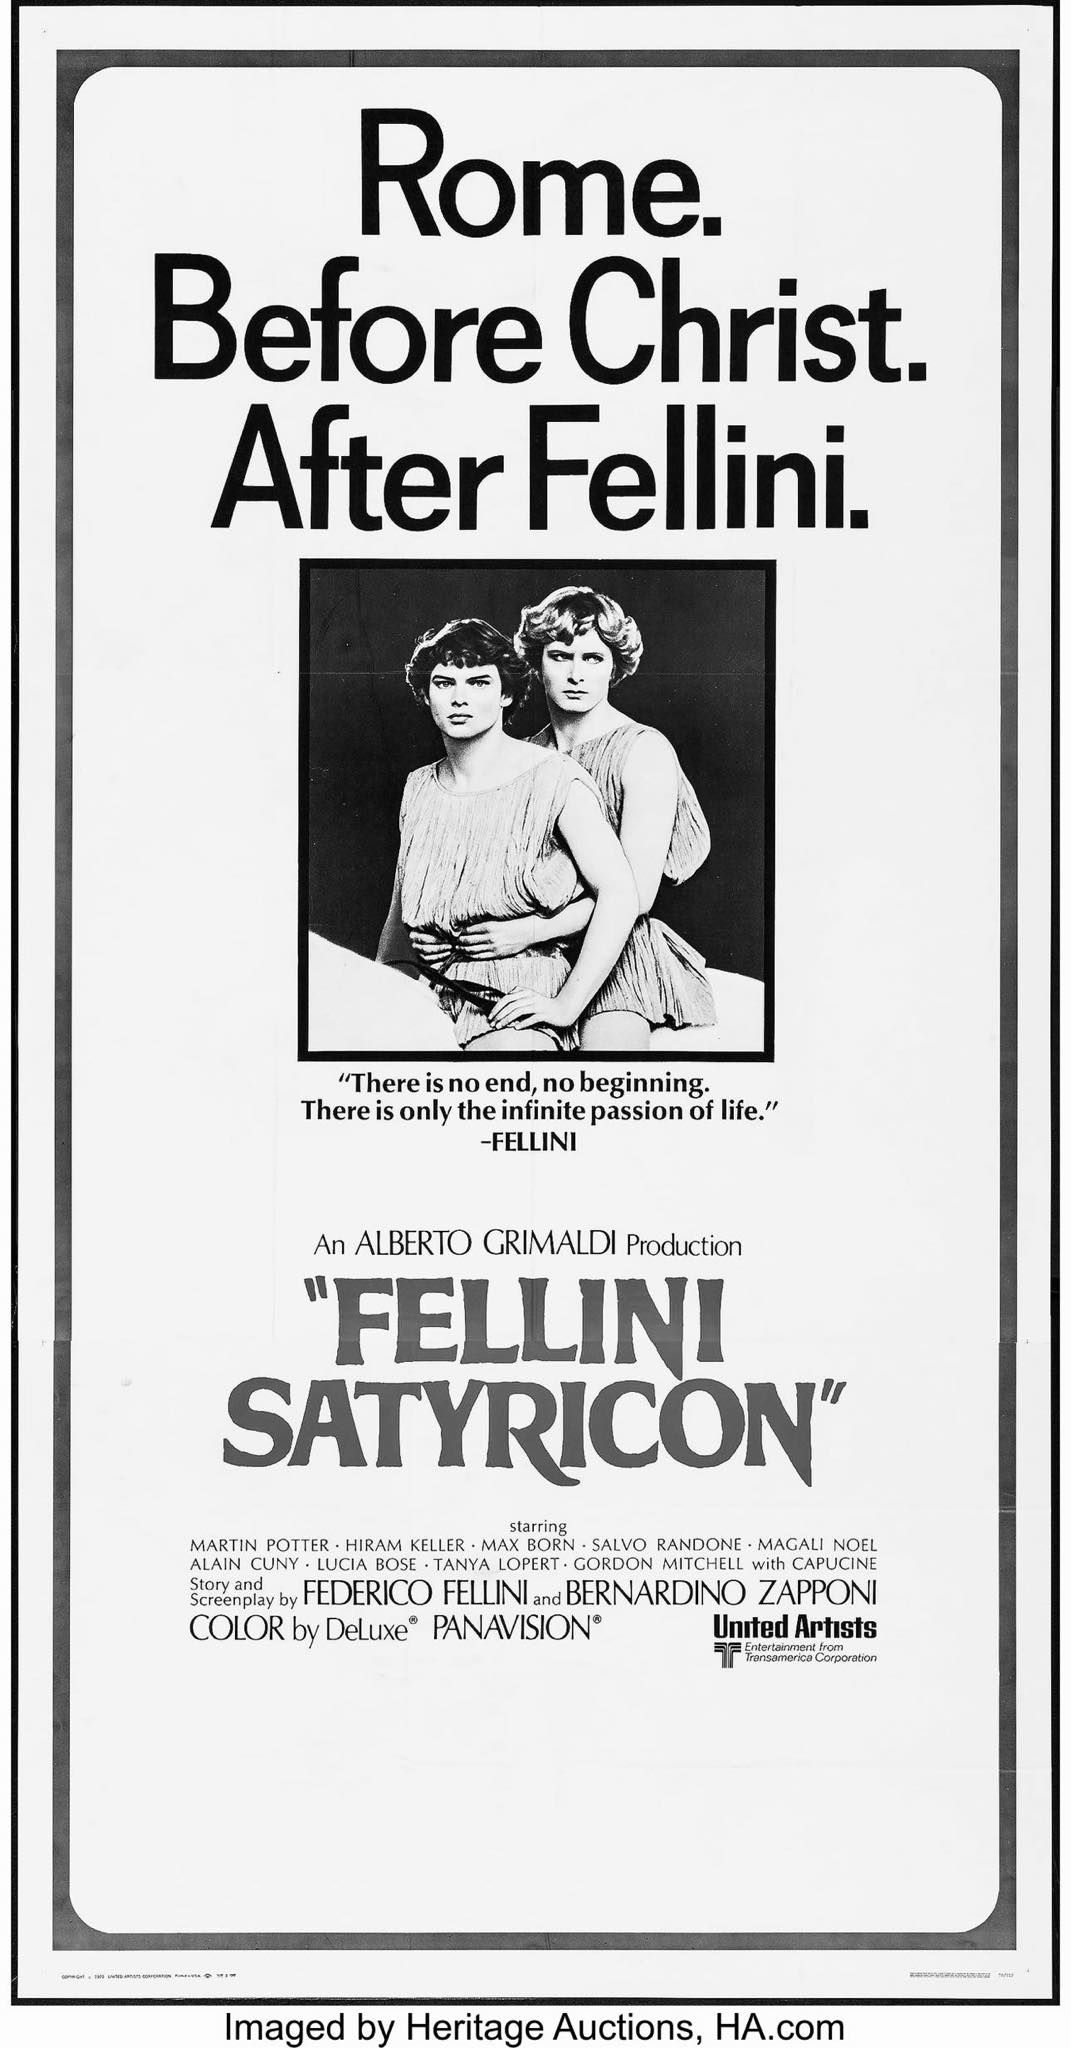 “When I was an art student in New York, I went to see Fellini’s “SATYRICON”…” (EXCLUSIVE) Interview with Pamela PerryGoulardt